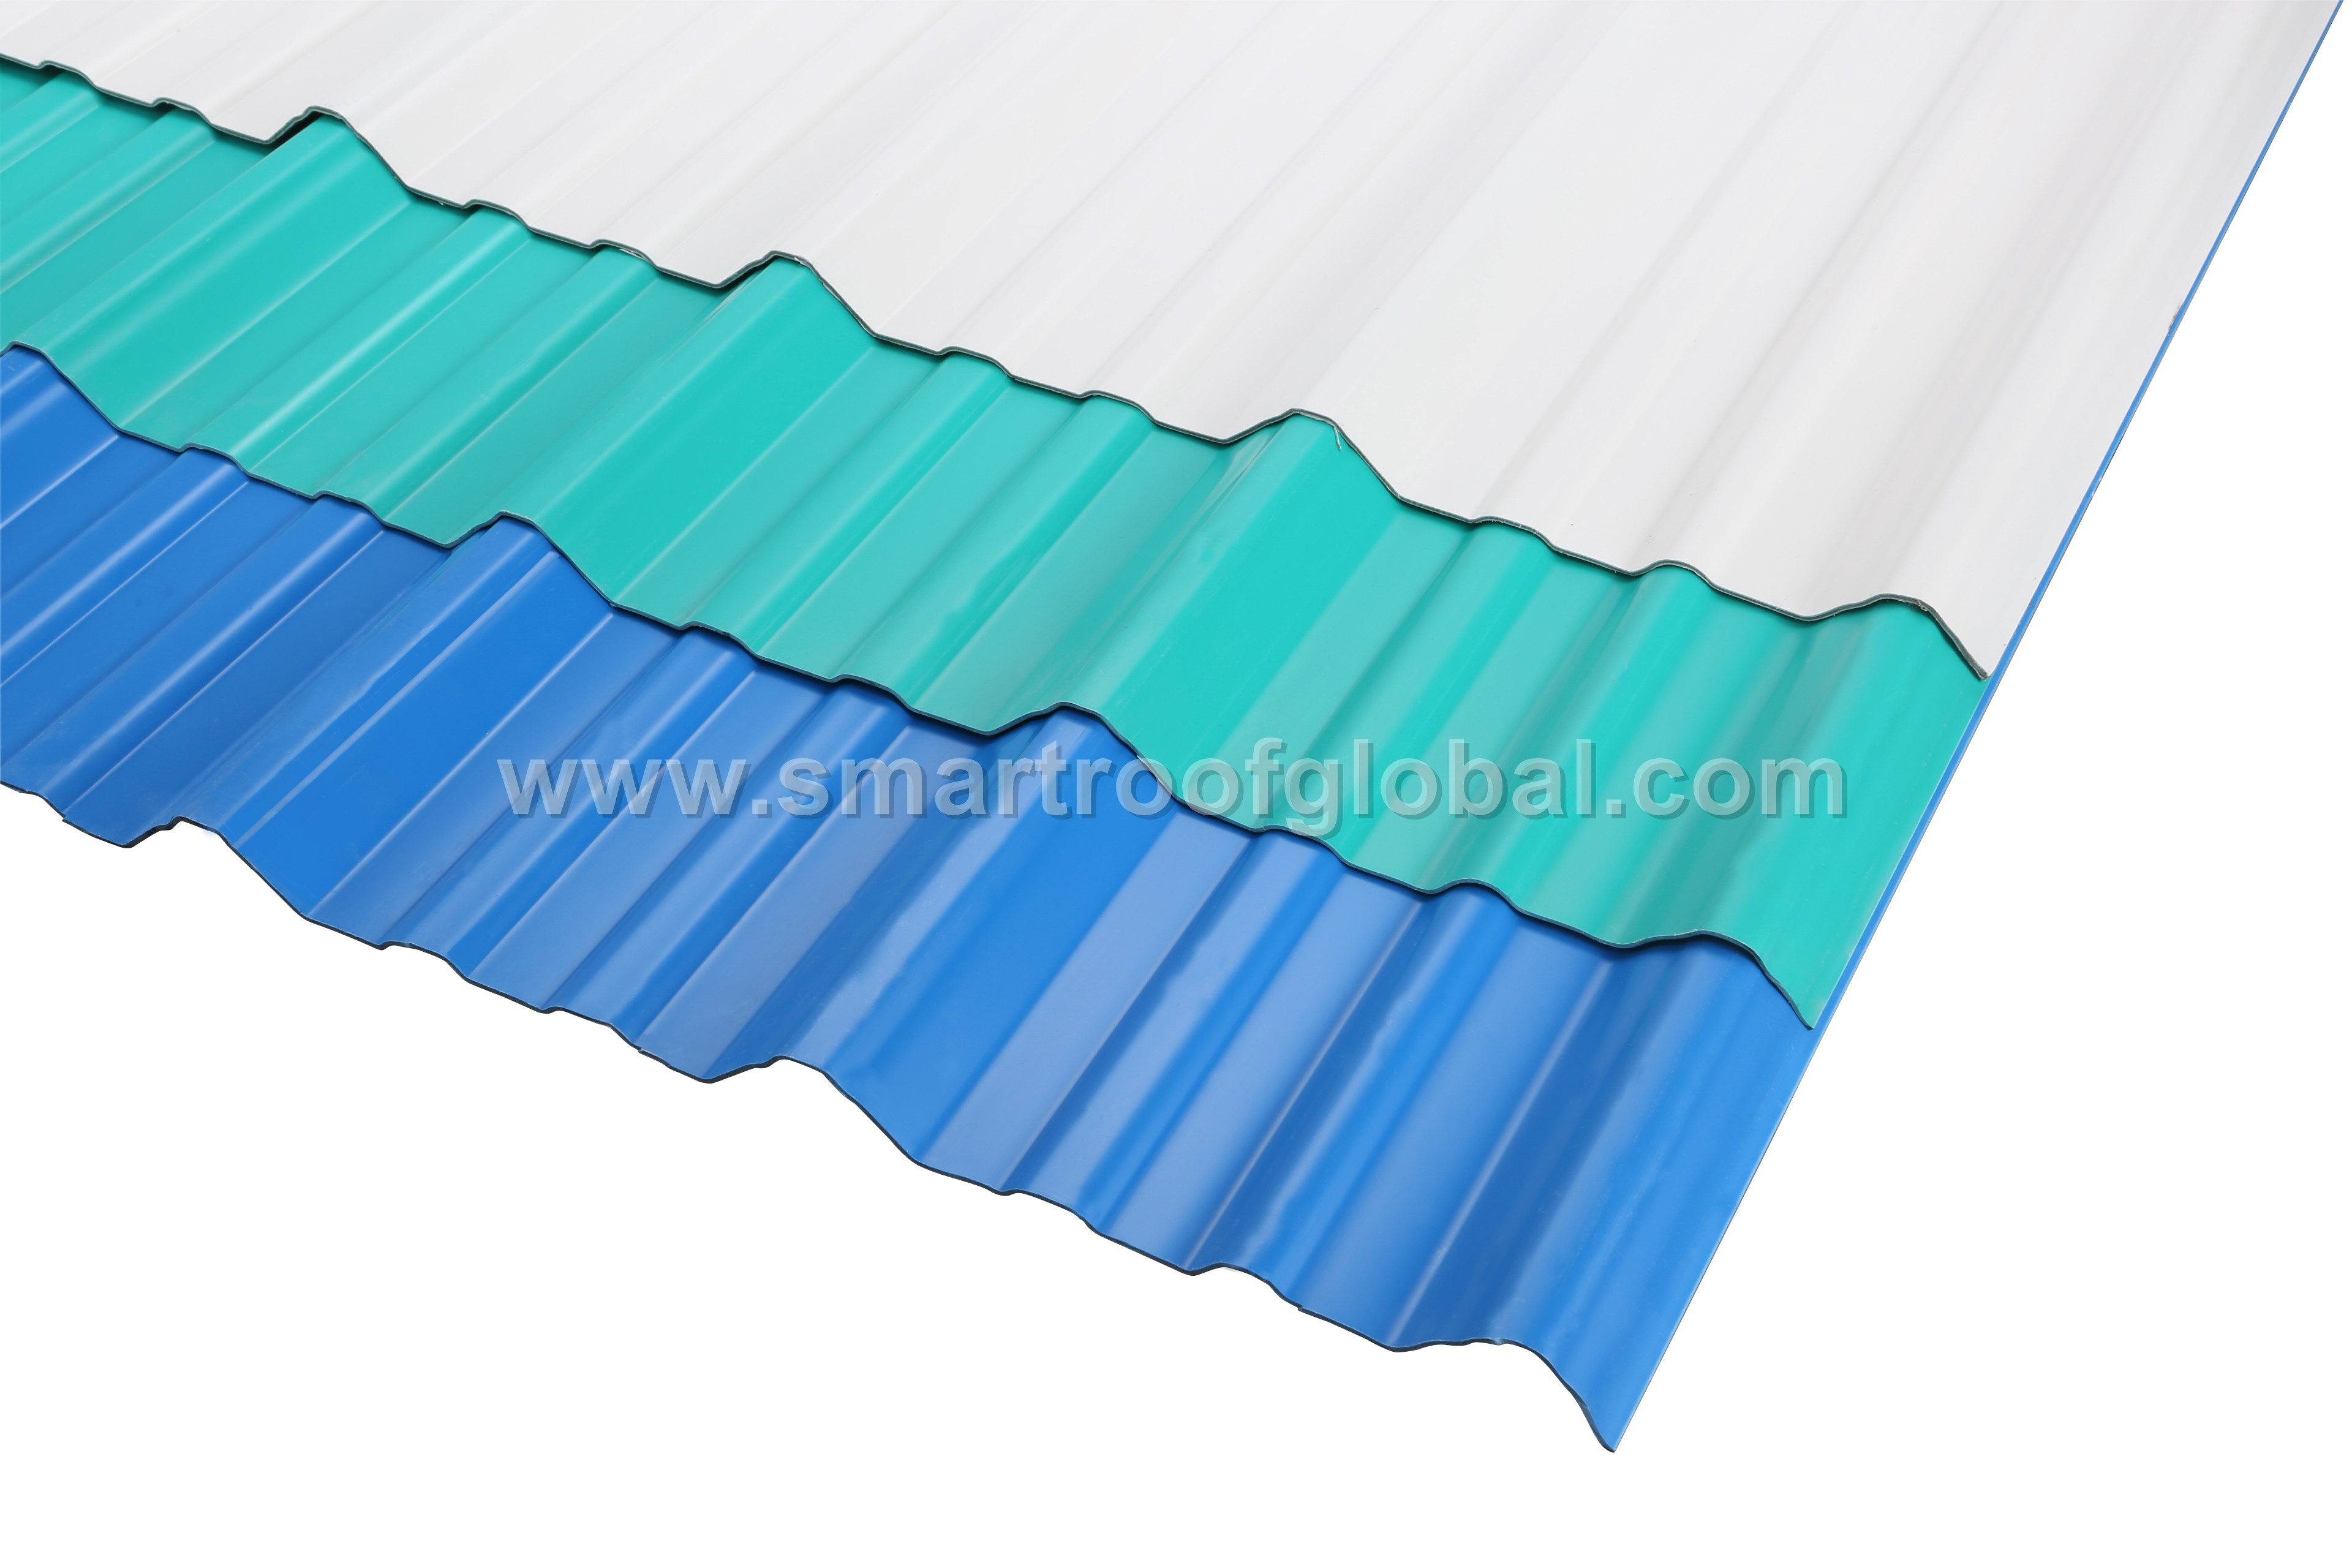 PriceList for Plastic Pvc Roof Tile - Polycarbonate Sheets For Greenhouse – Smartroof